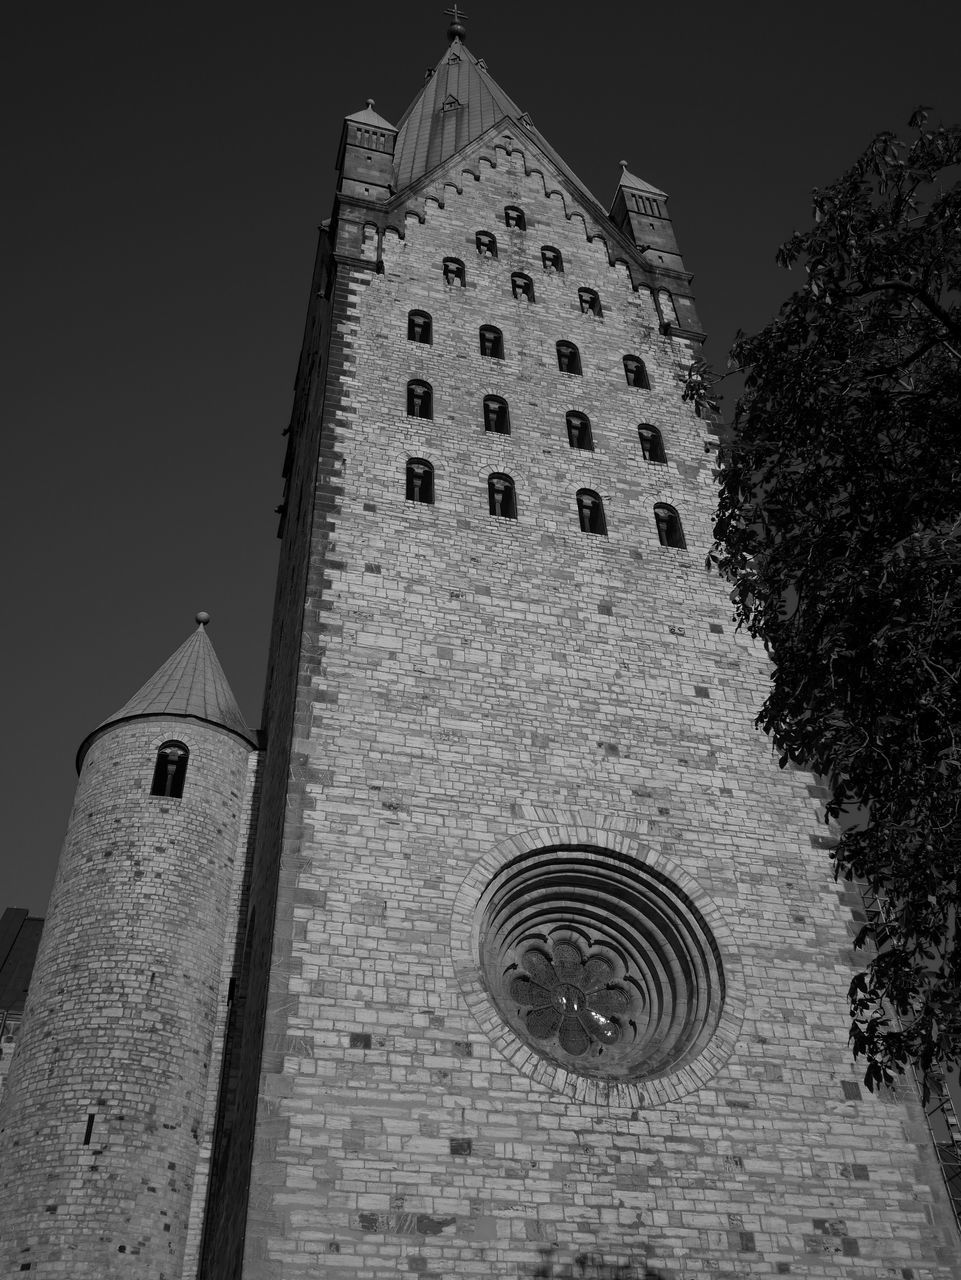 architecture, built structure, building exterior, black and white, low angle view, tower, monochrome, building, history, the past, monochrome photography, black, place of worship, white, sky, no people, religion, castle, nature, belief, travel destinations, spirituality, clear sky, outdoors, darkness, clock, old, travel